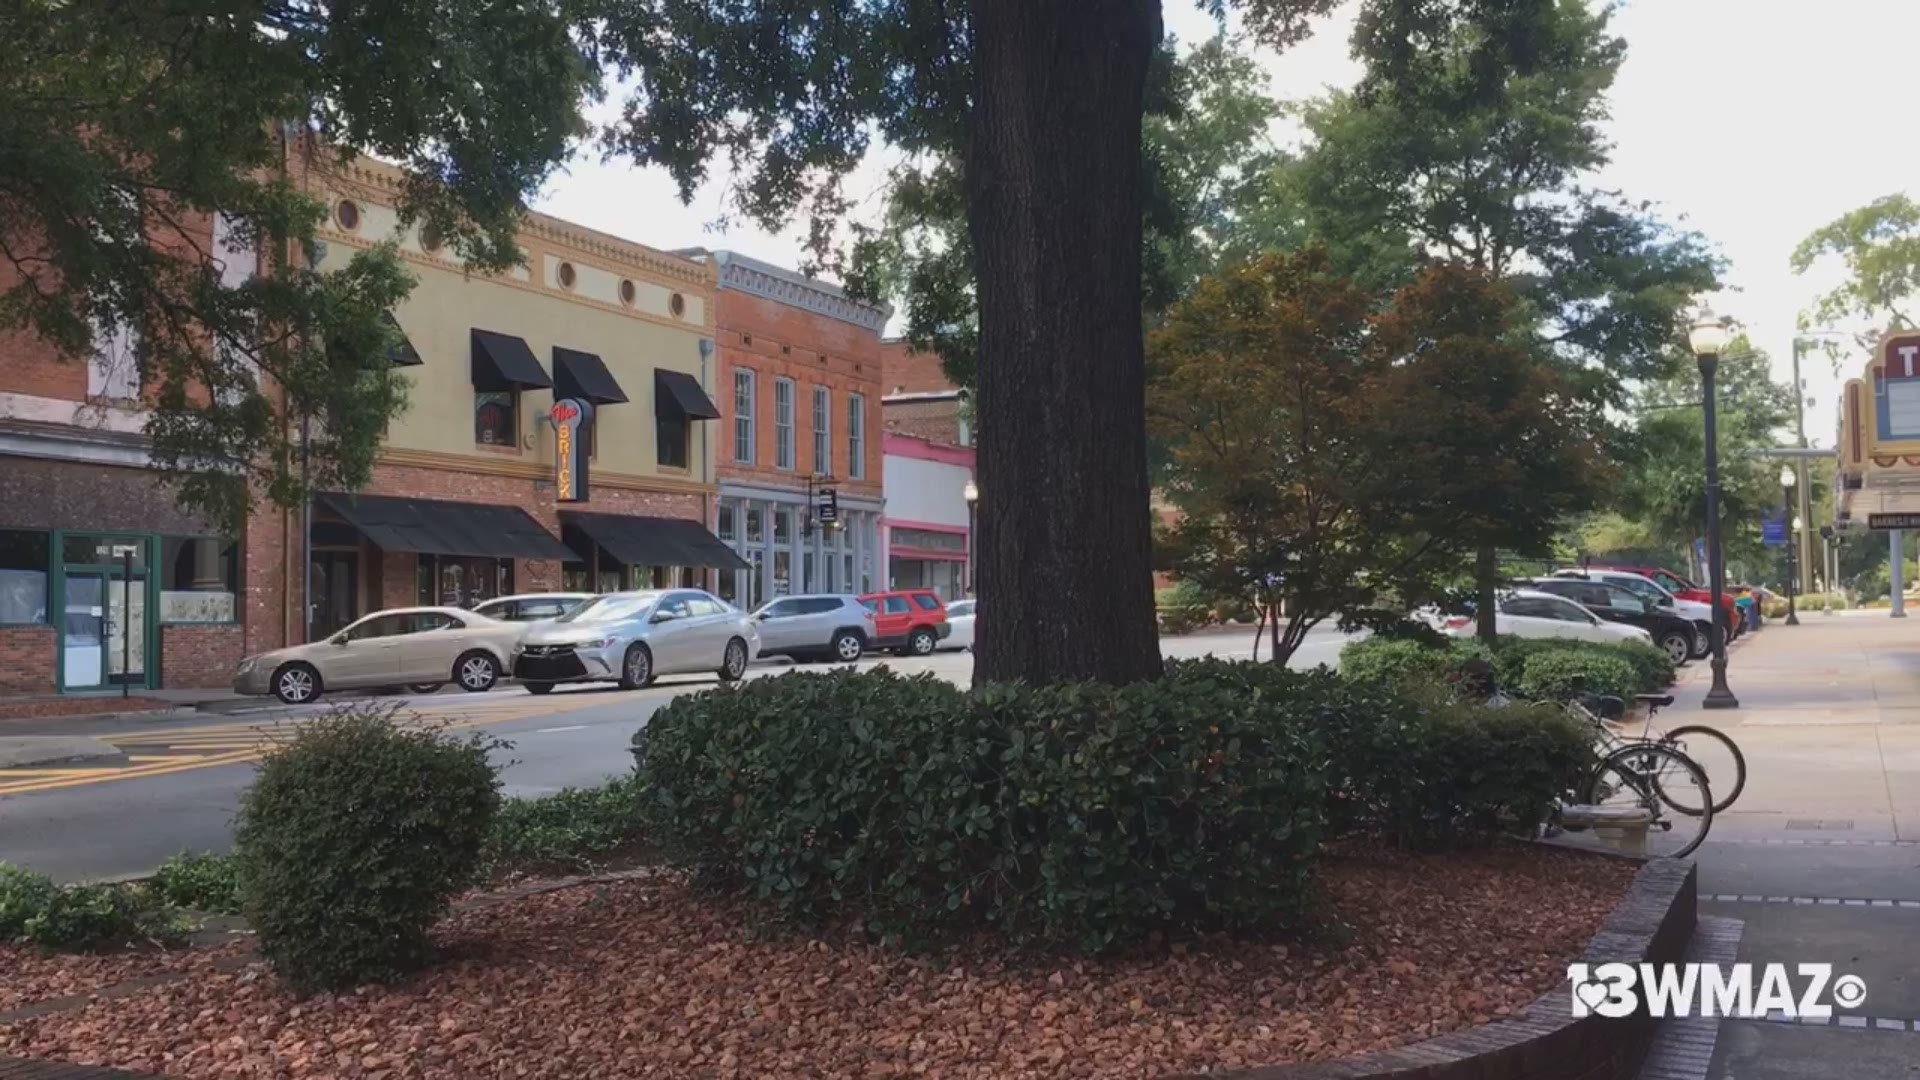 Milledgeville was rated by Budget Travel the fifth coolest small town in America this month.